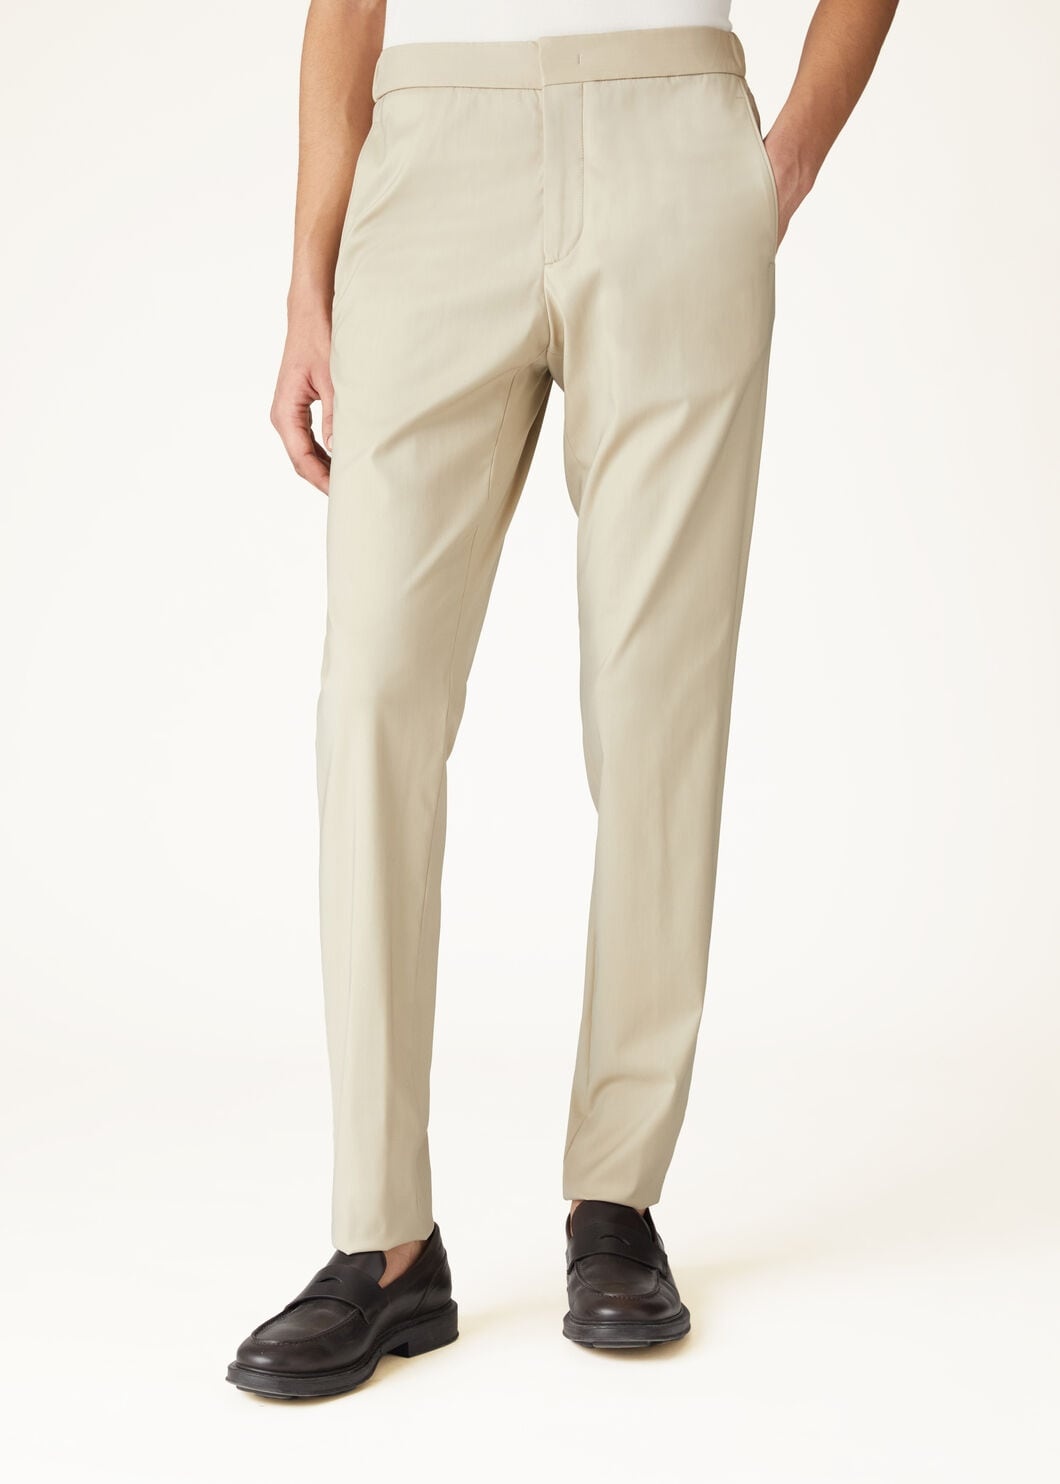 Leisure City Trousers - 4